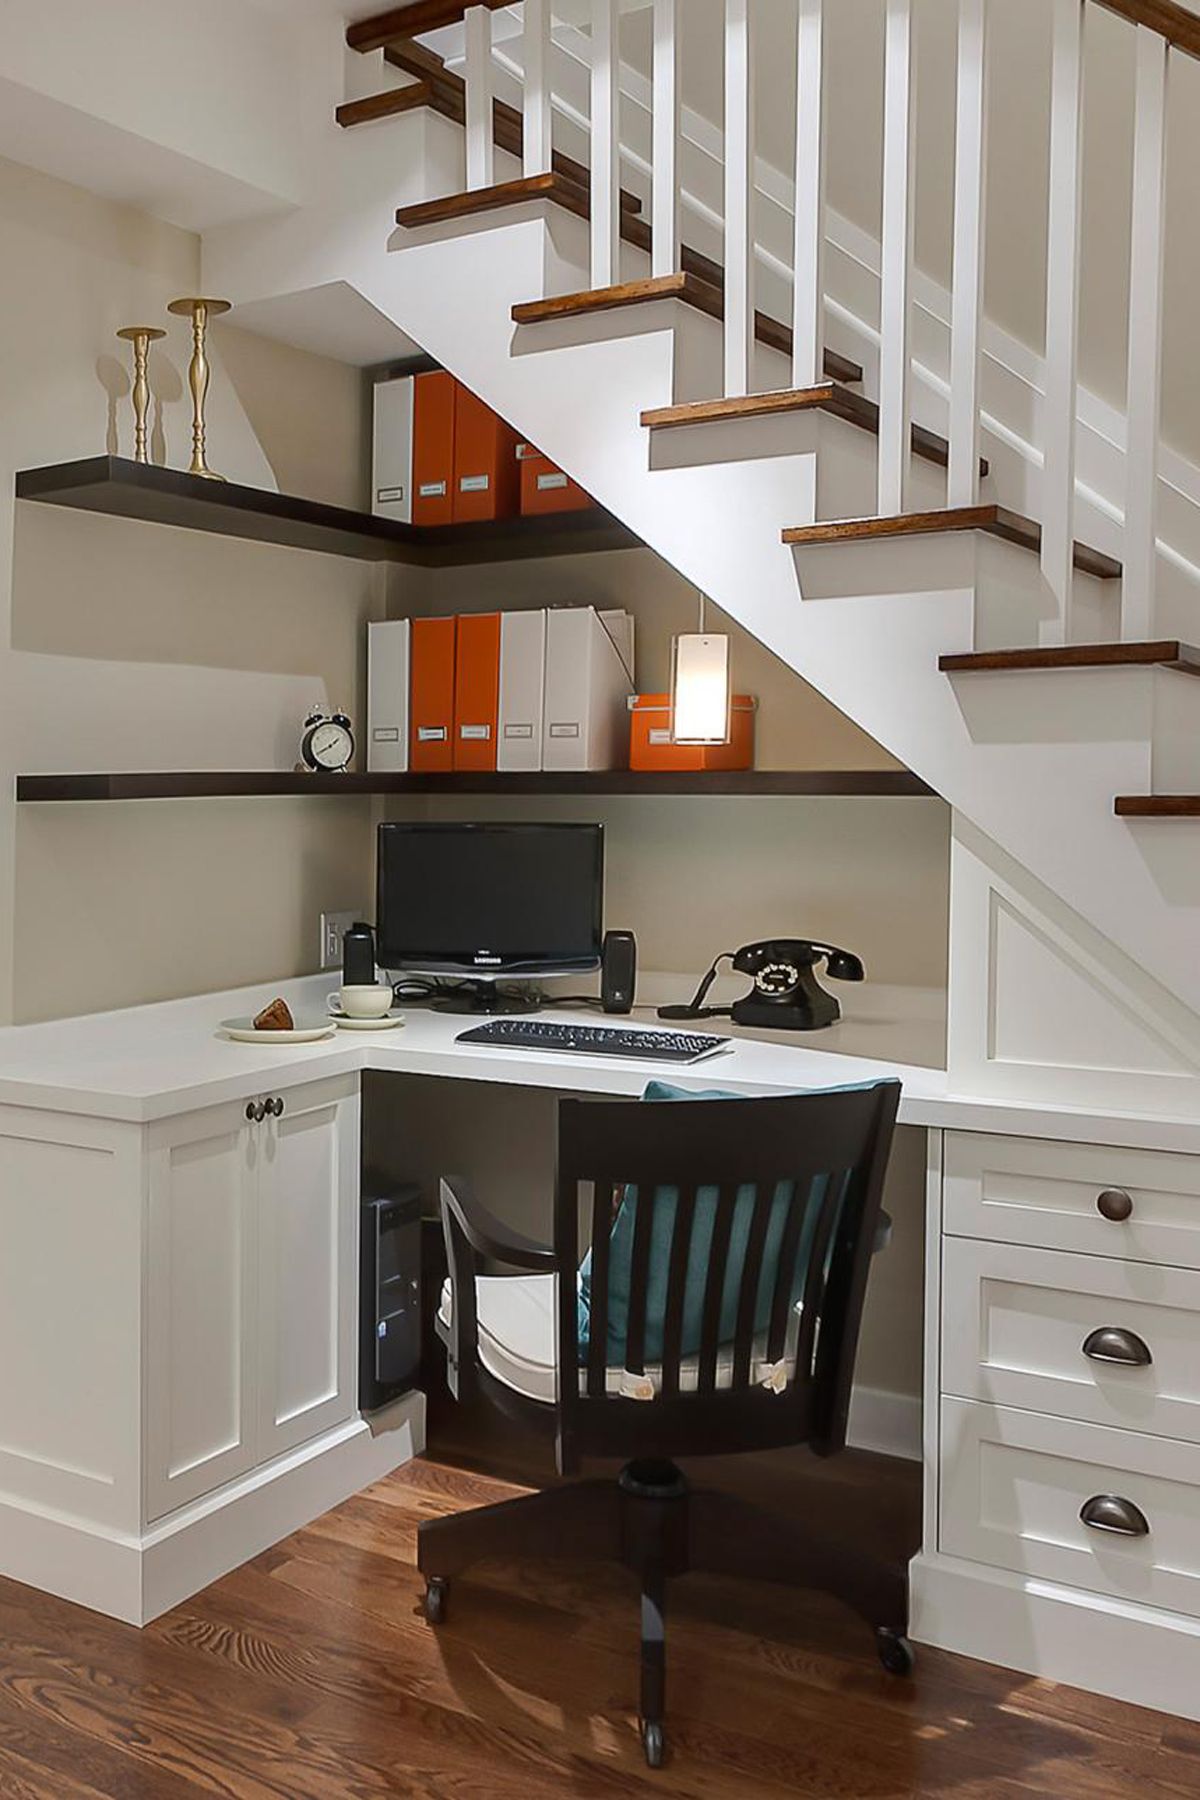 20 Best Under Stair Storage Ideas - What To Do With Empty Space Under Stairs